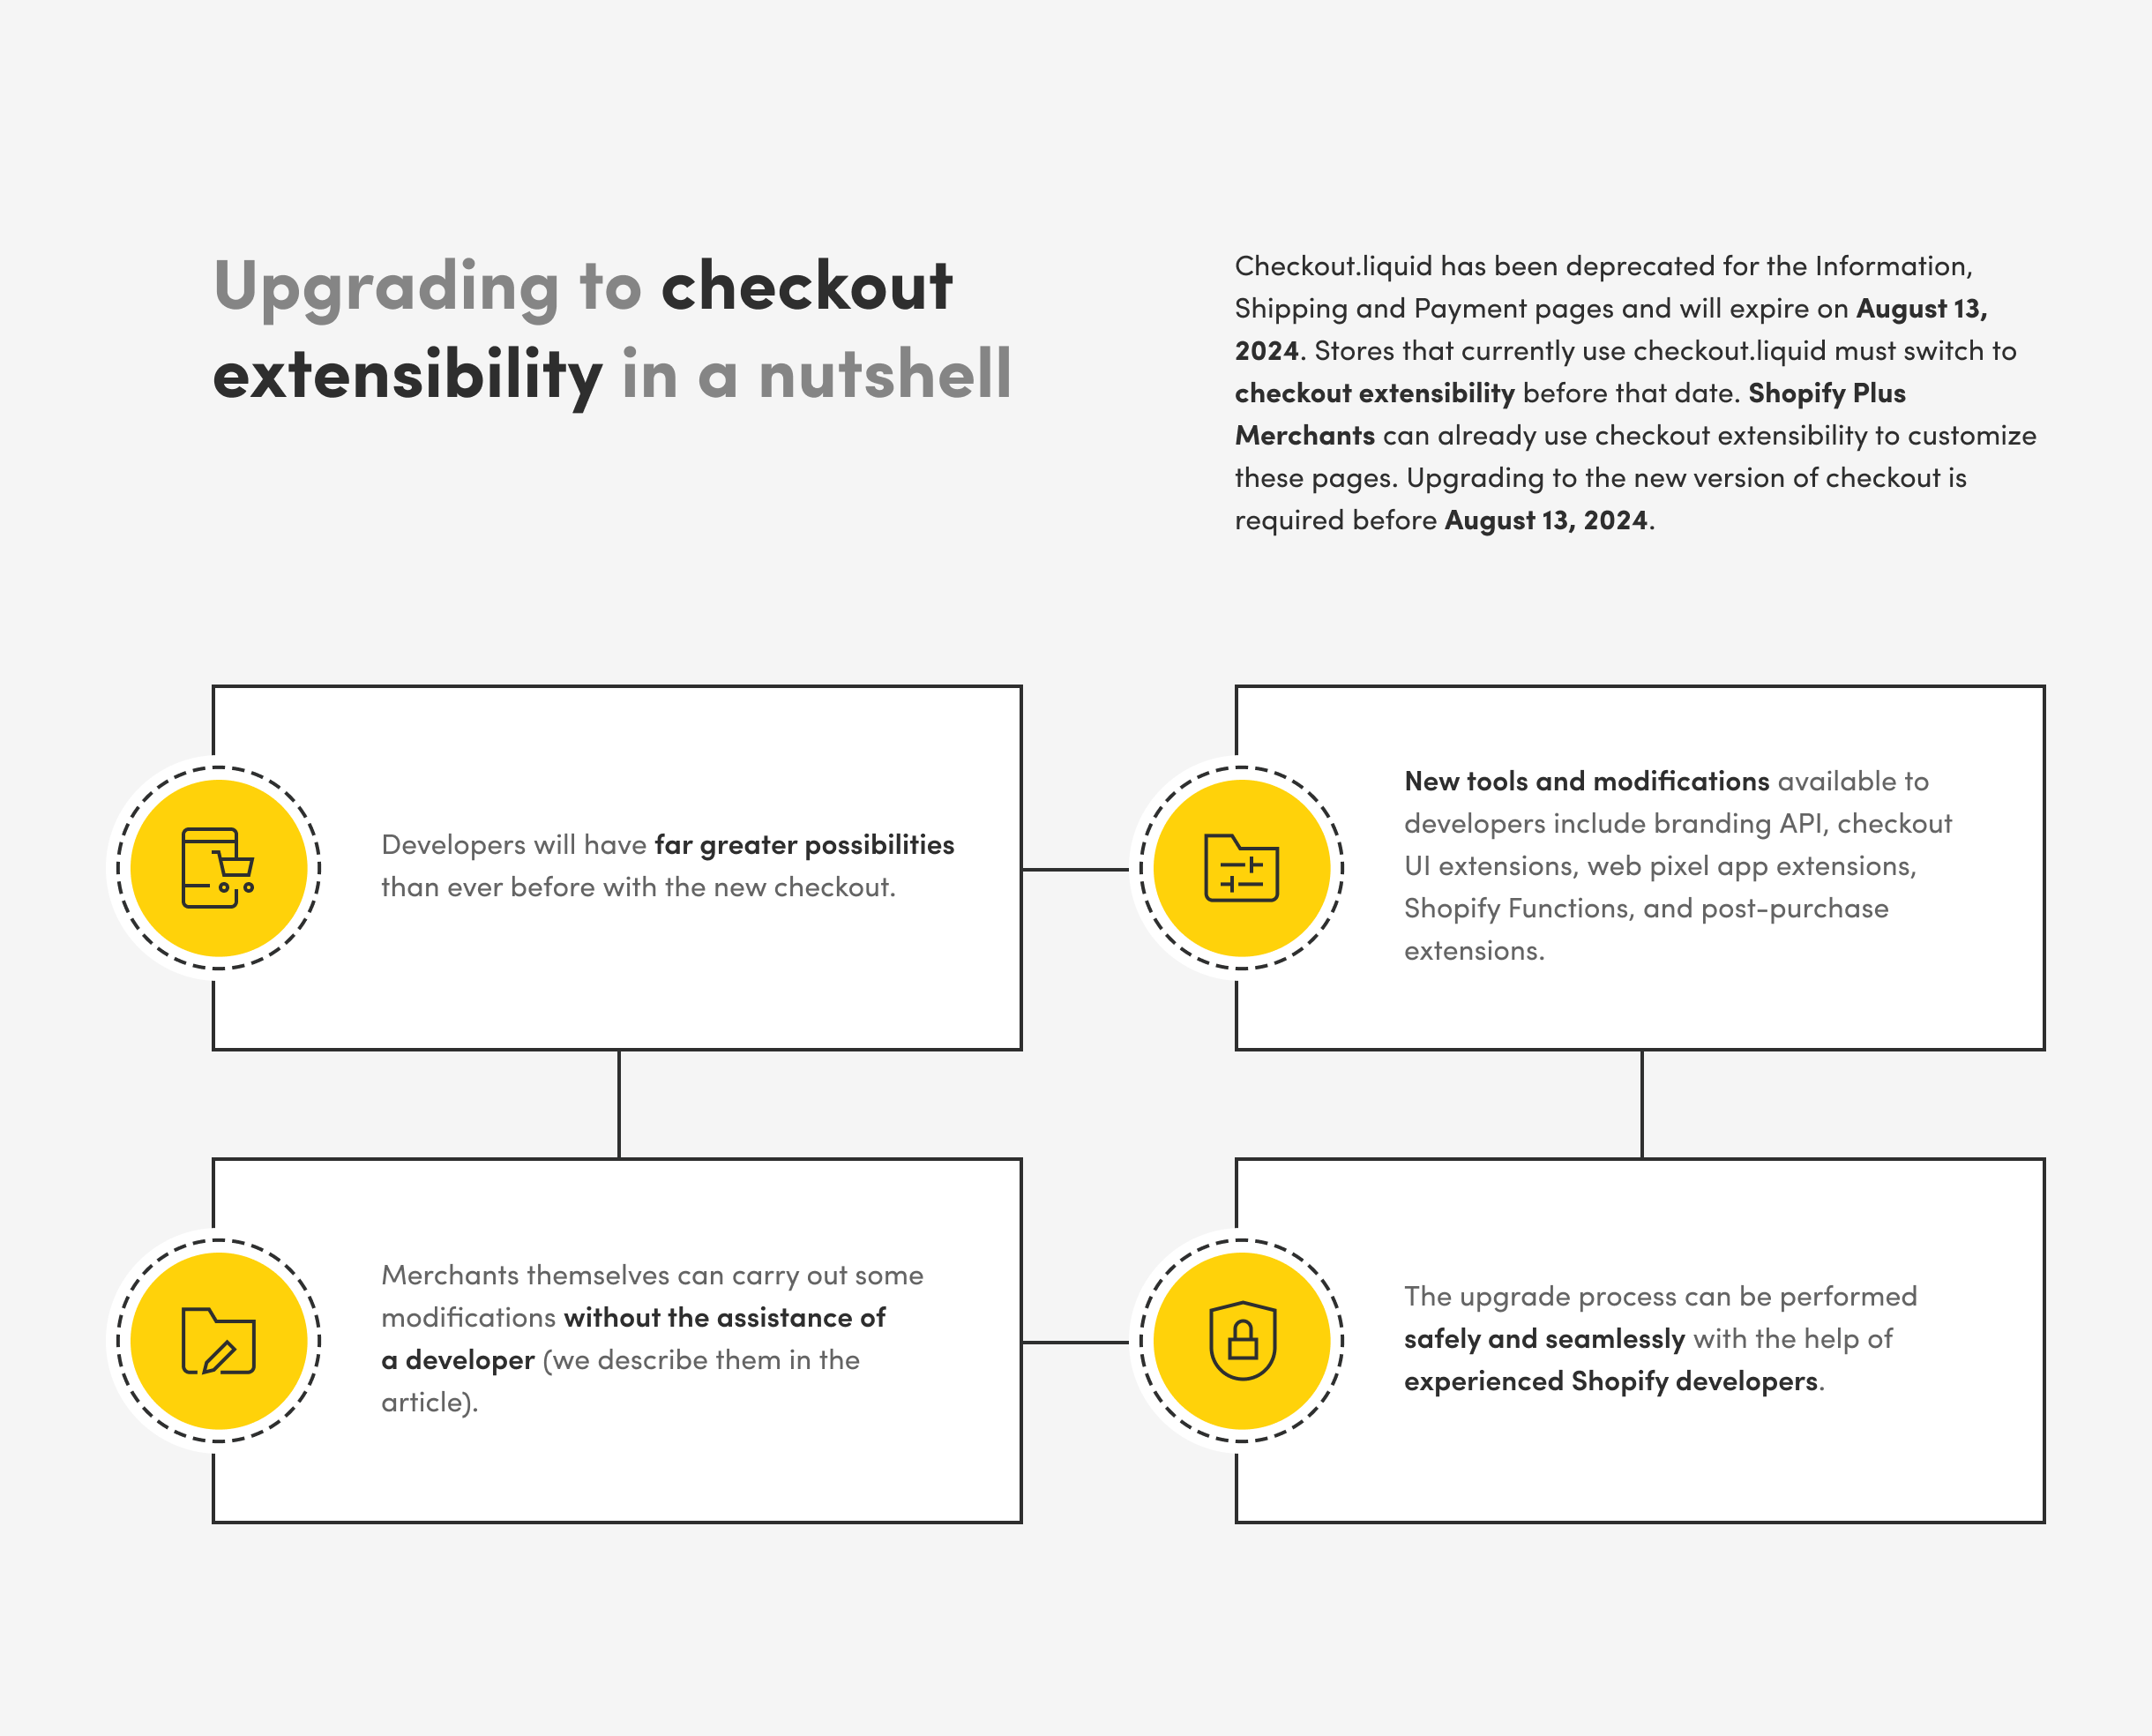 A graphics showcasing key details of upgrading to checkout extensibility.